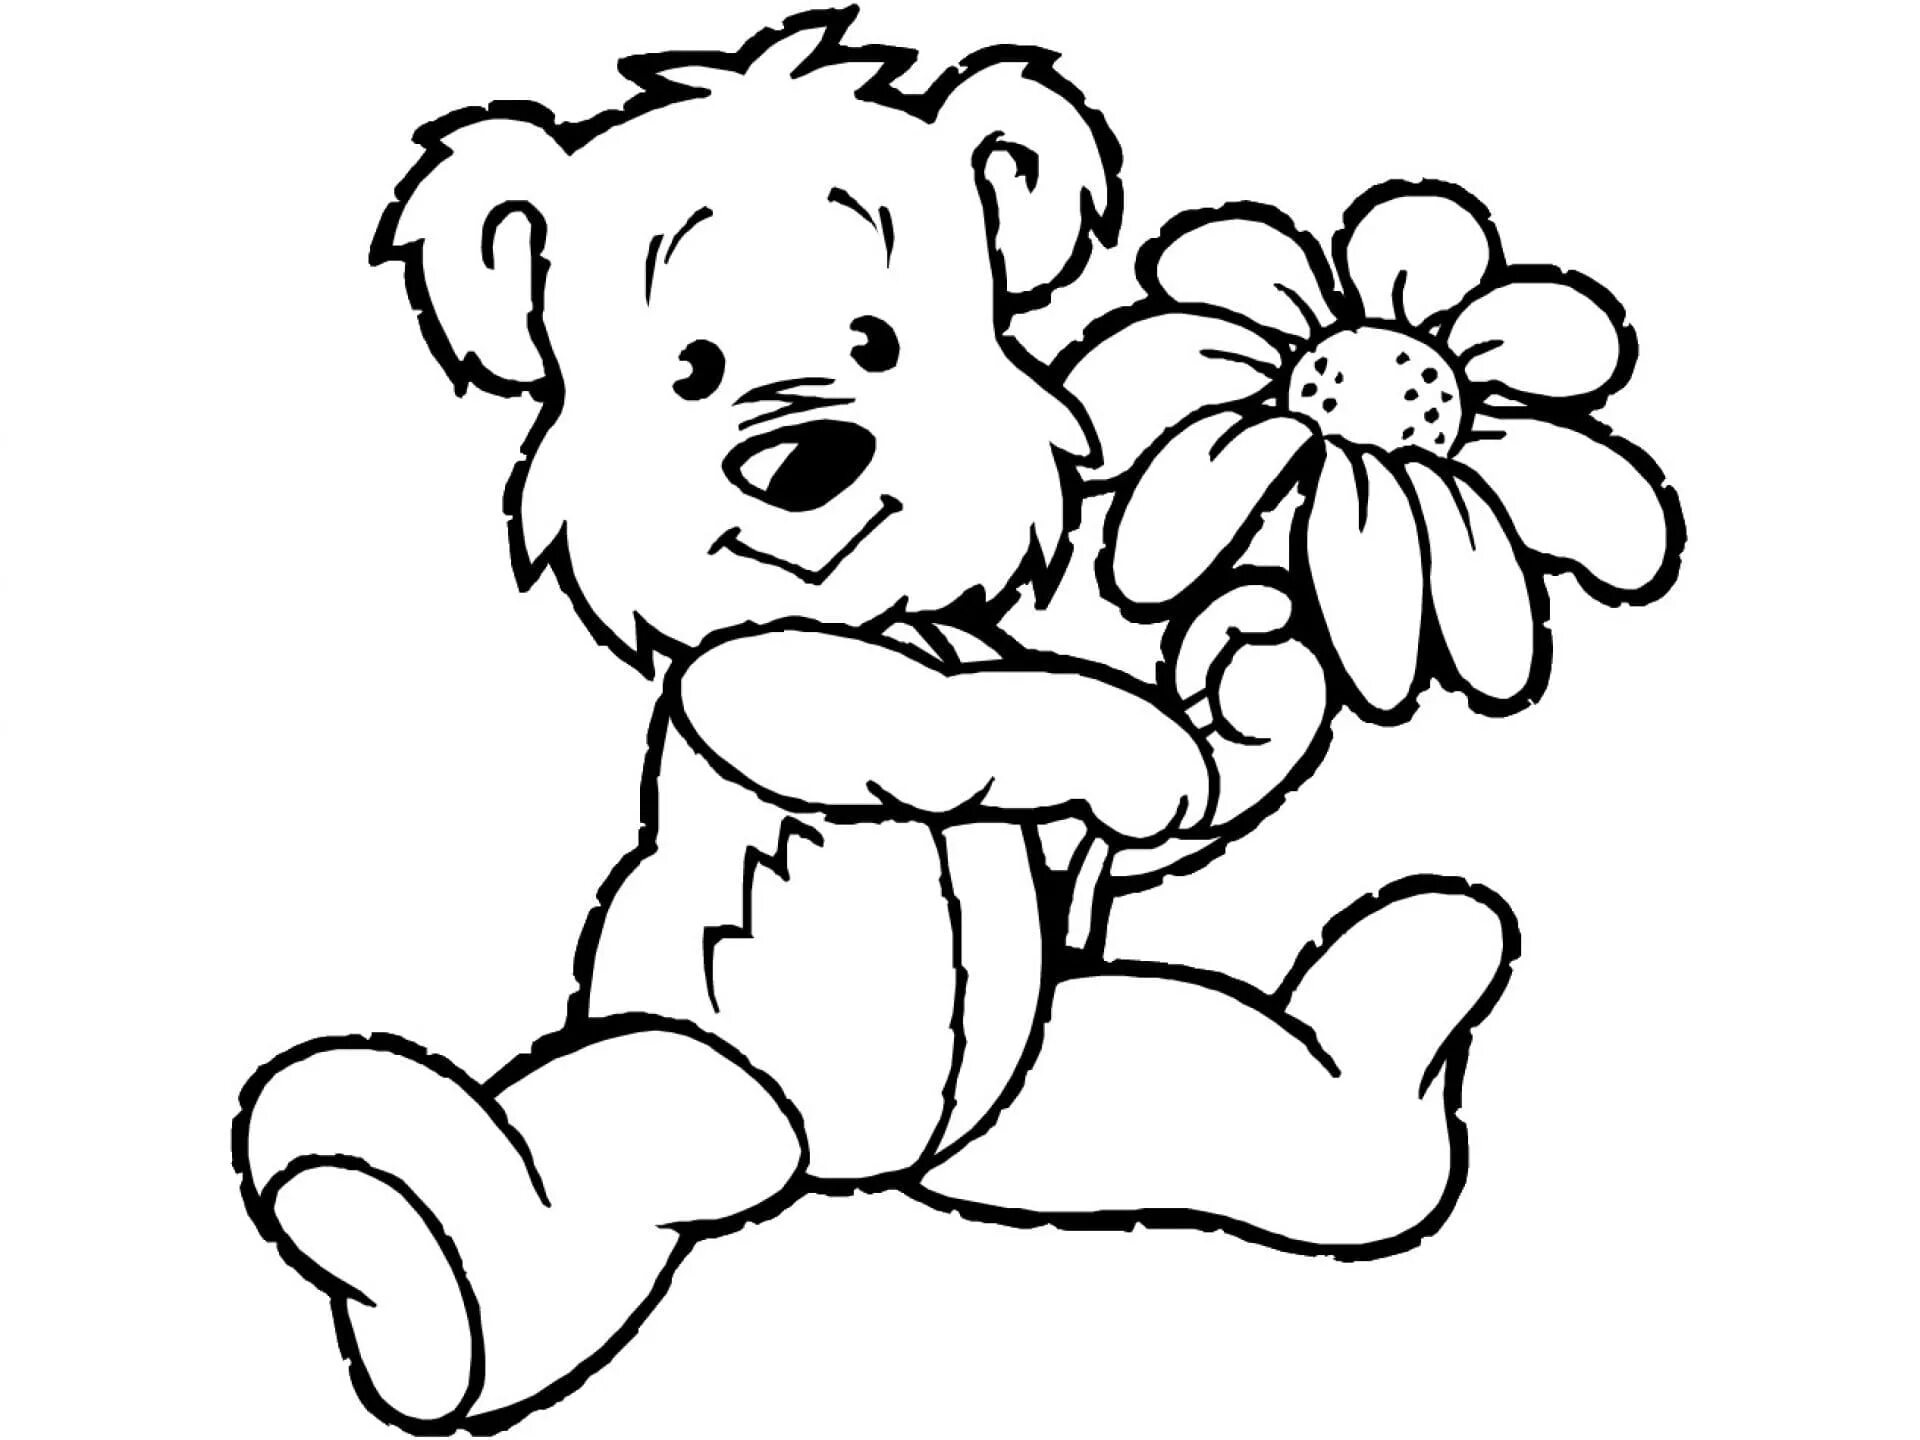 Cute teddy bear coloring book for ages 5-6